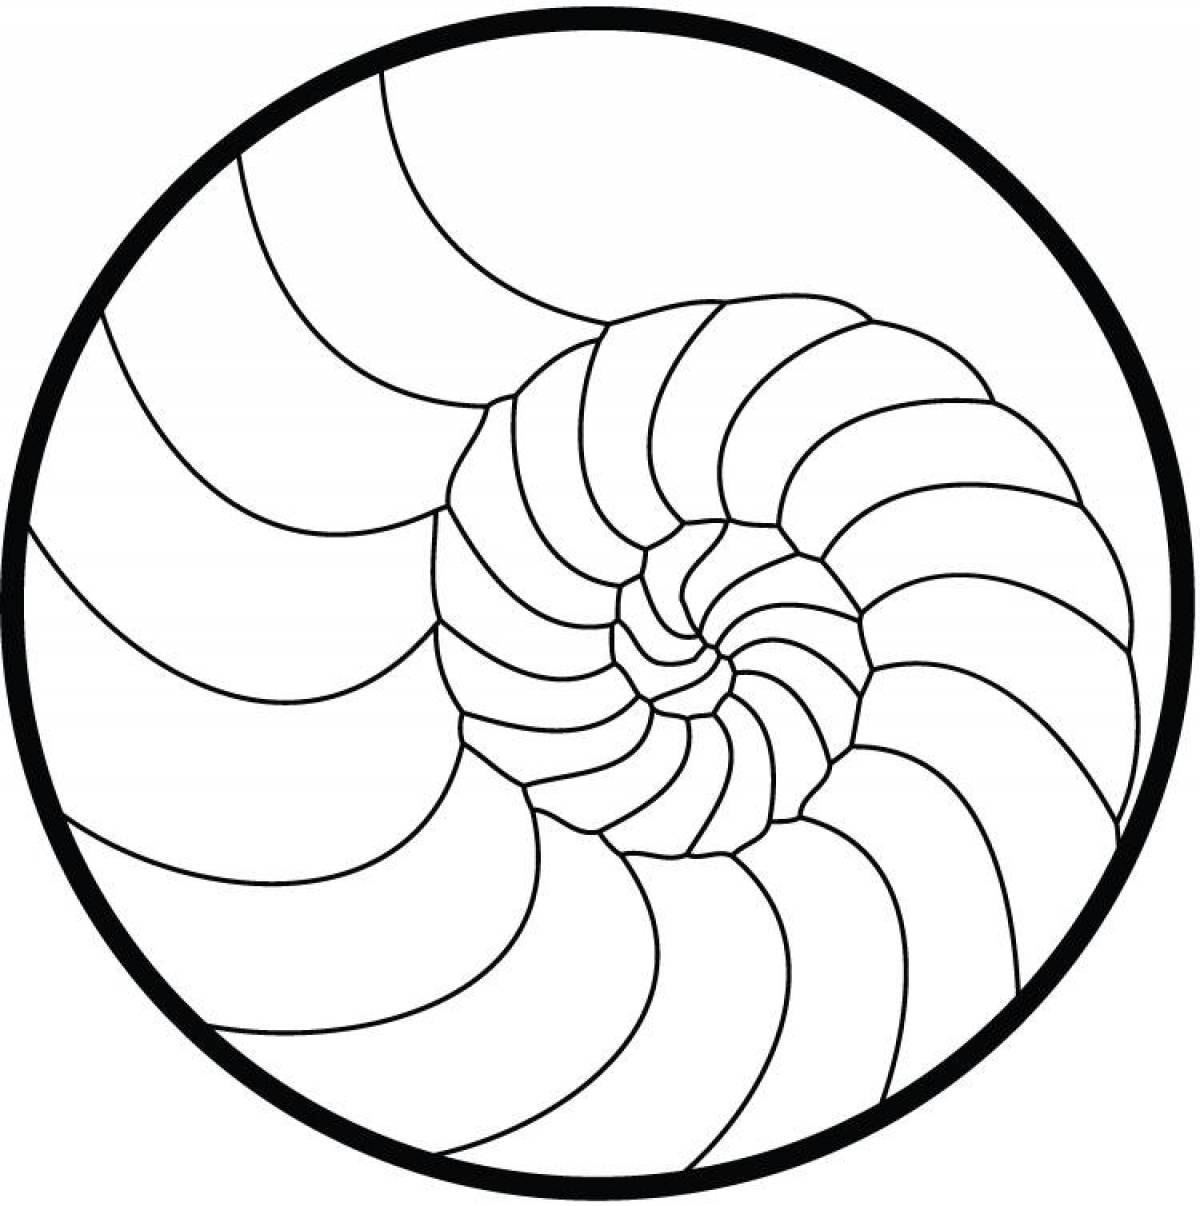 Exquisite spiral pattern coloring book